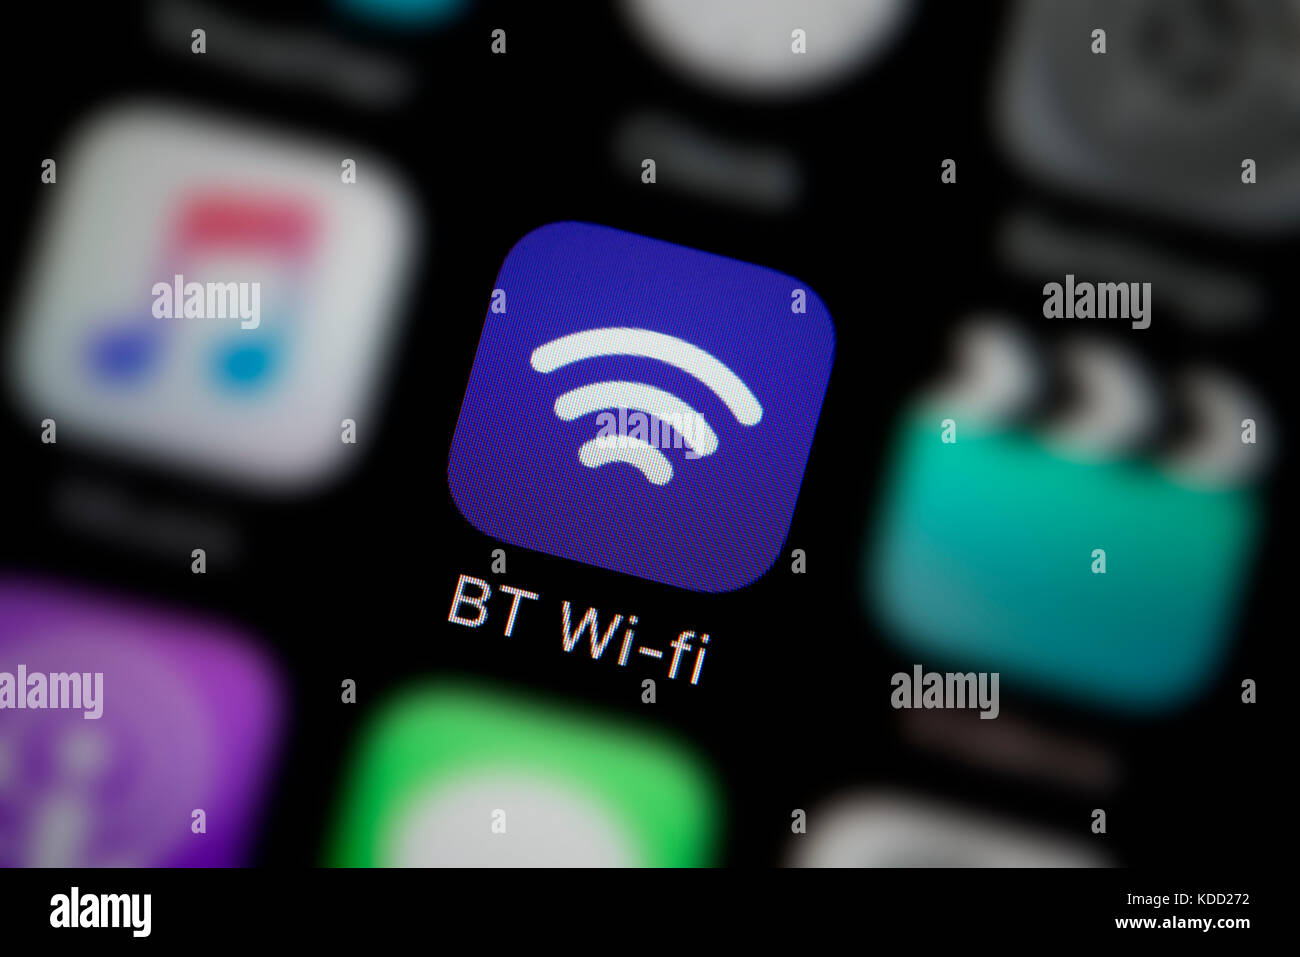 A close-up shot of the logo representing BT wi-fi app icon, as seen on the screen of a smart phone (Editorial use only) Stock Photo